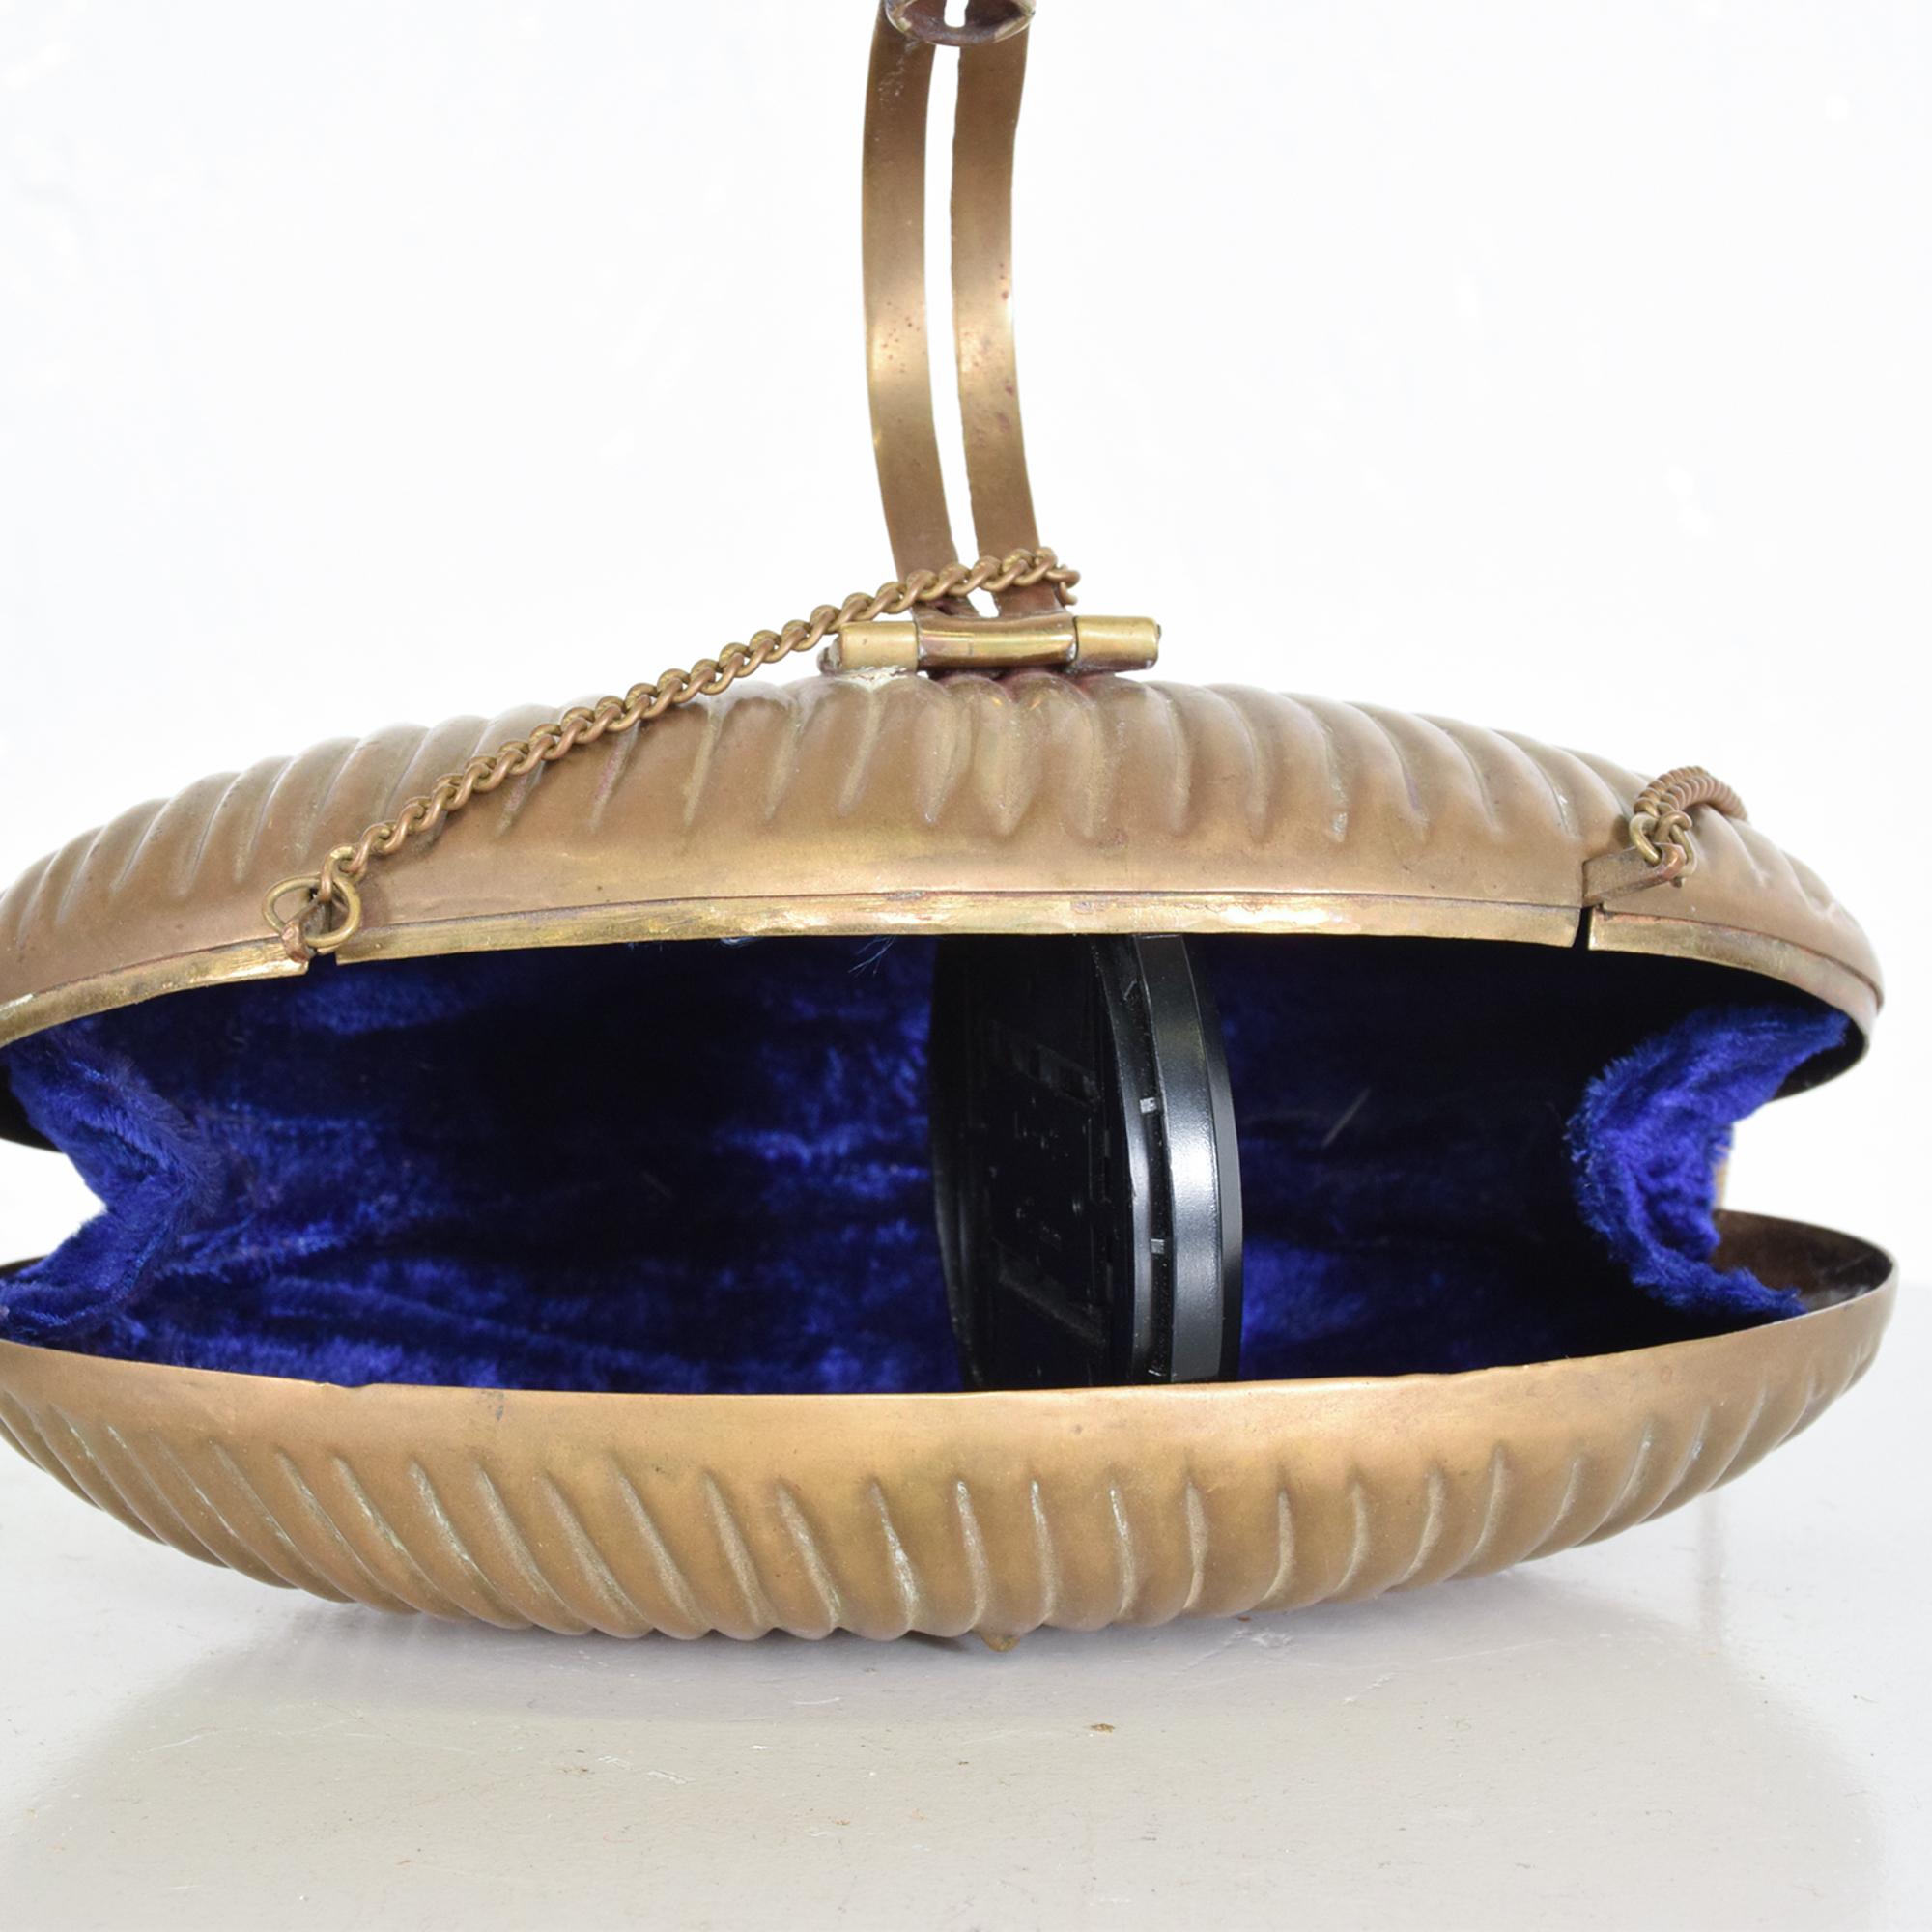 AMBIANIC presents
Art Deco Clamshell brass evening bag purse with gold shoulder chain + lovely velvet purple lining, circa 1940s
No maker label present. In the style of Judith Leiber.
4.5 L x 7 W x 2 D inches has long shoulder chain or hand carry